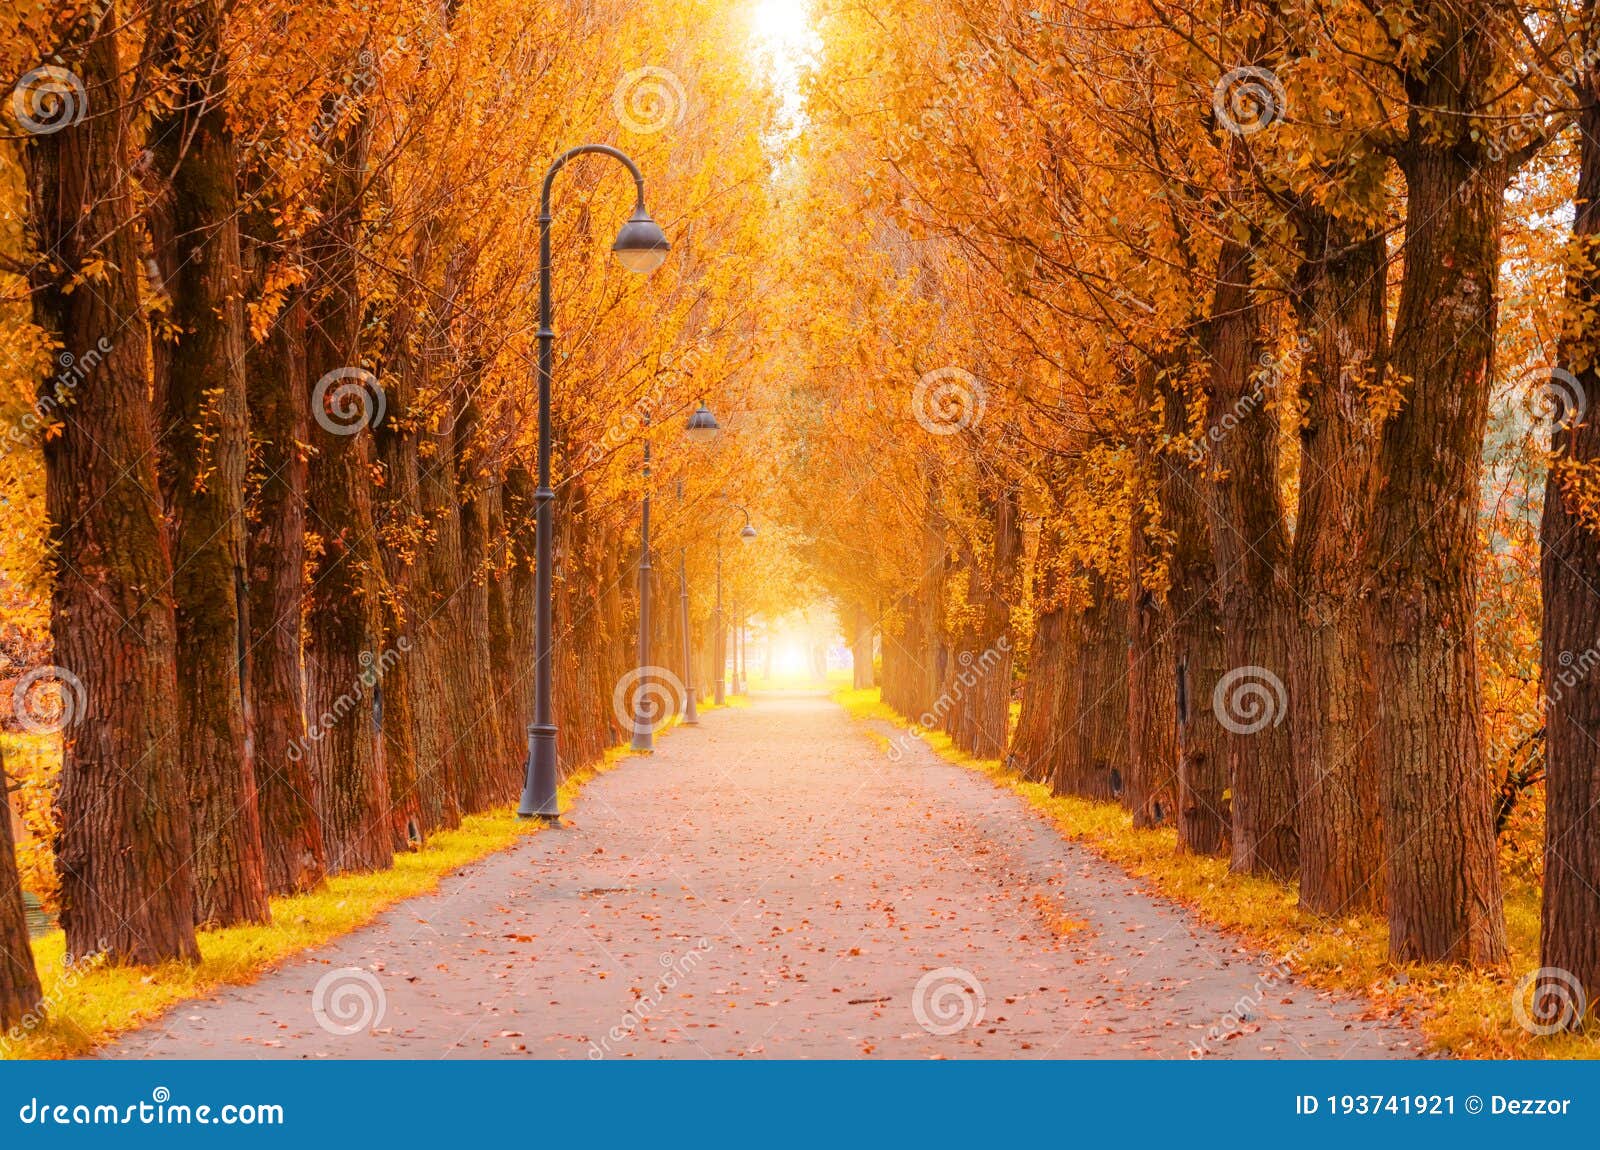 Autumn Alley with Rows of Poplars and Street Lamps Along the Hiking ...